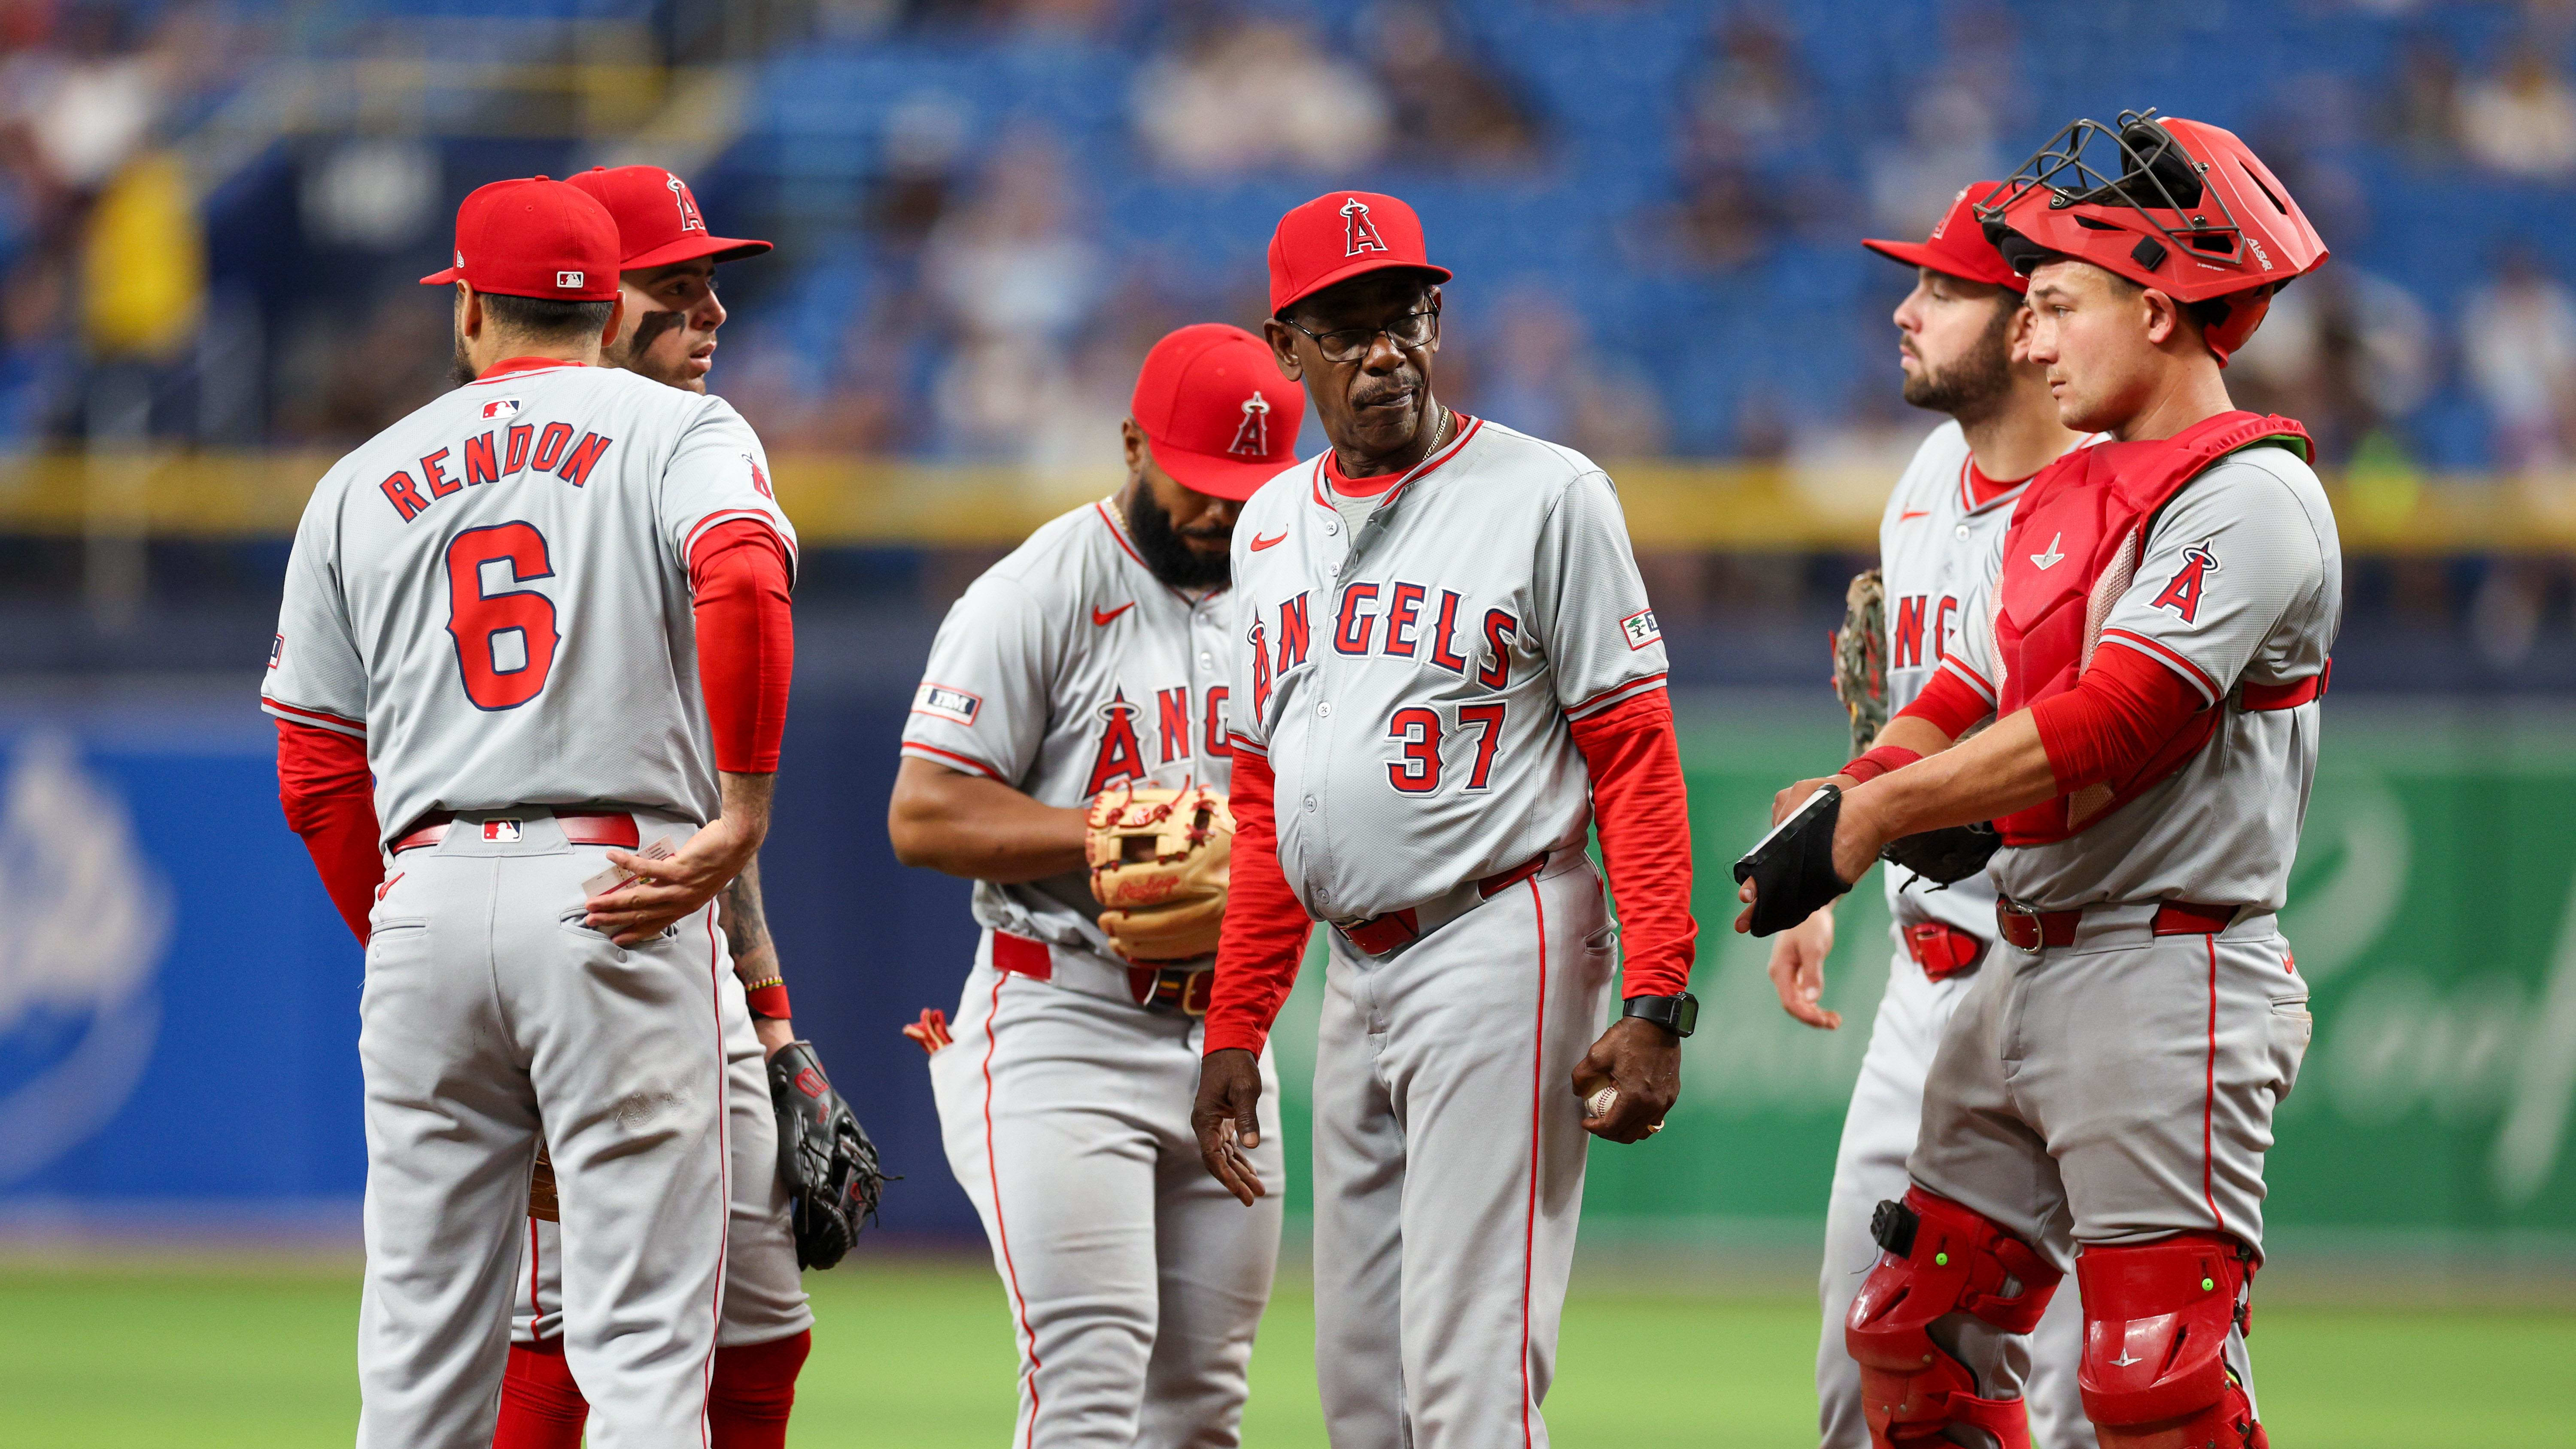 Former Angels Outfielder Throws Shade Before Revenge Game: 'Here, We Have a Plan'